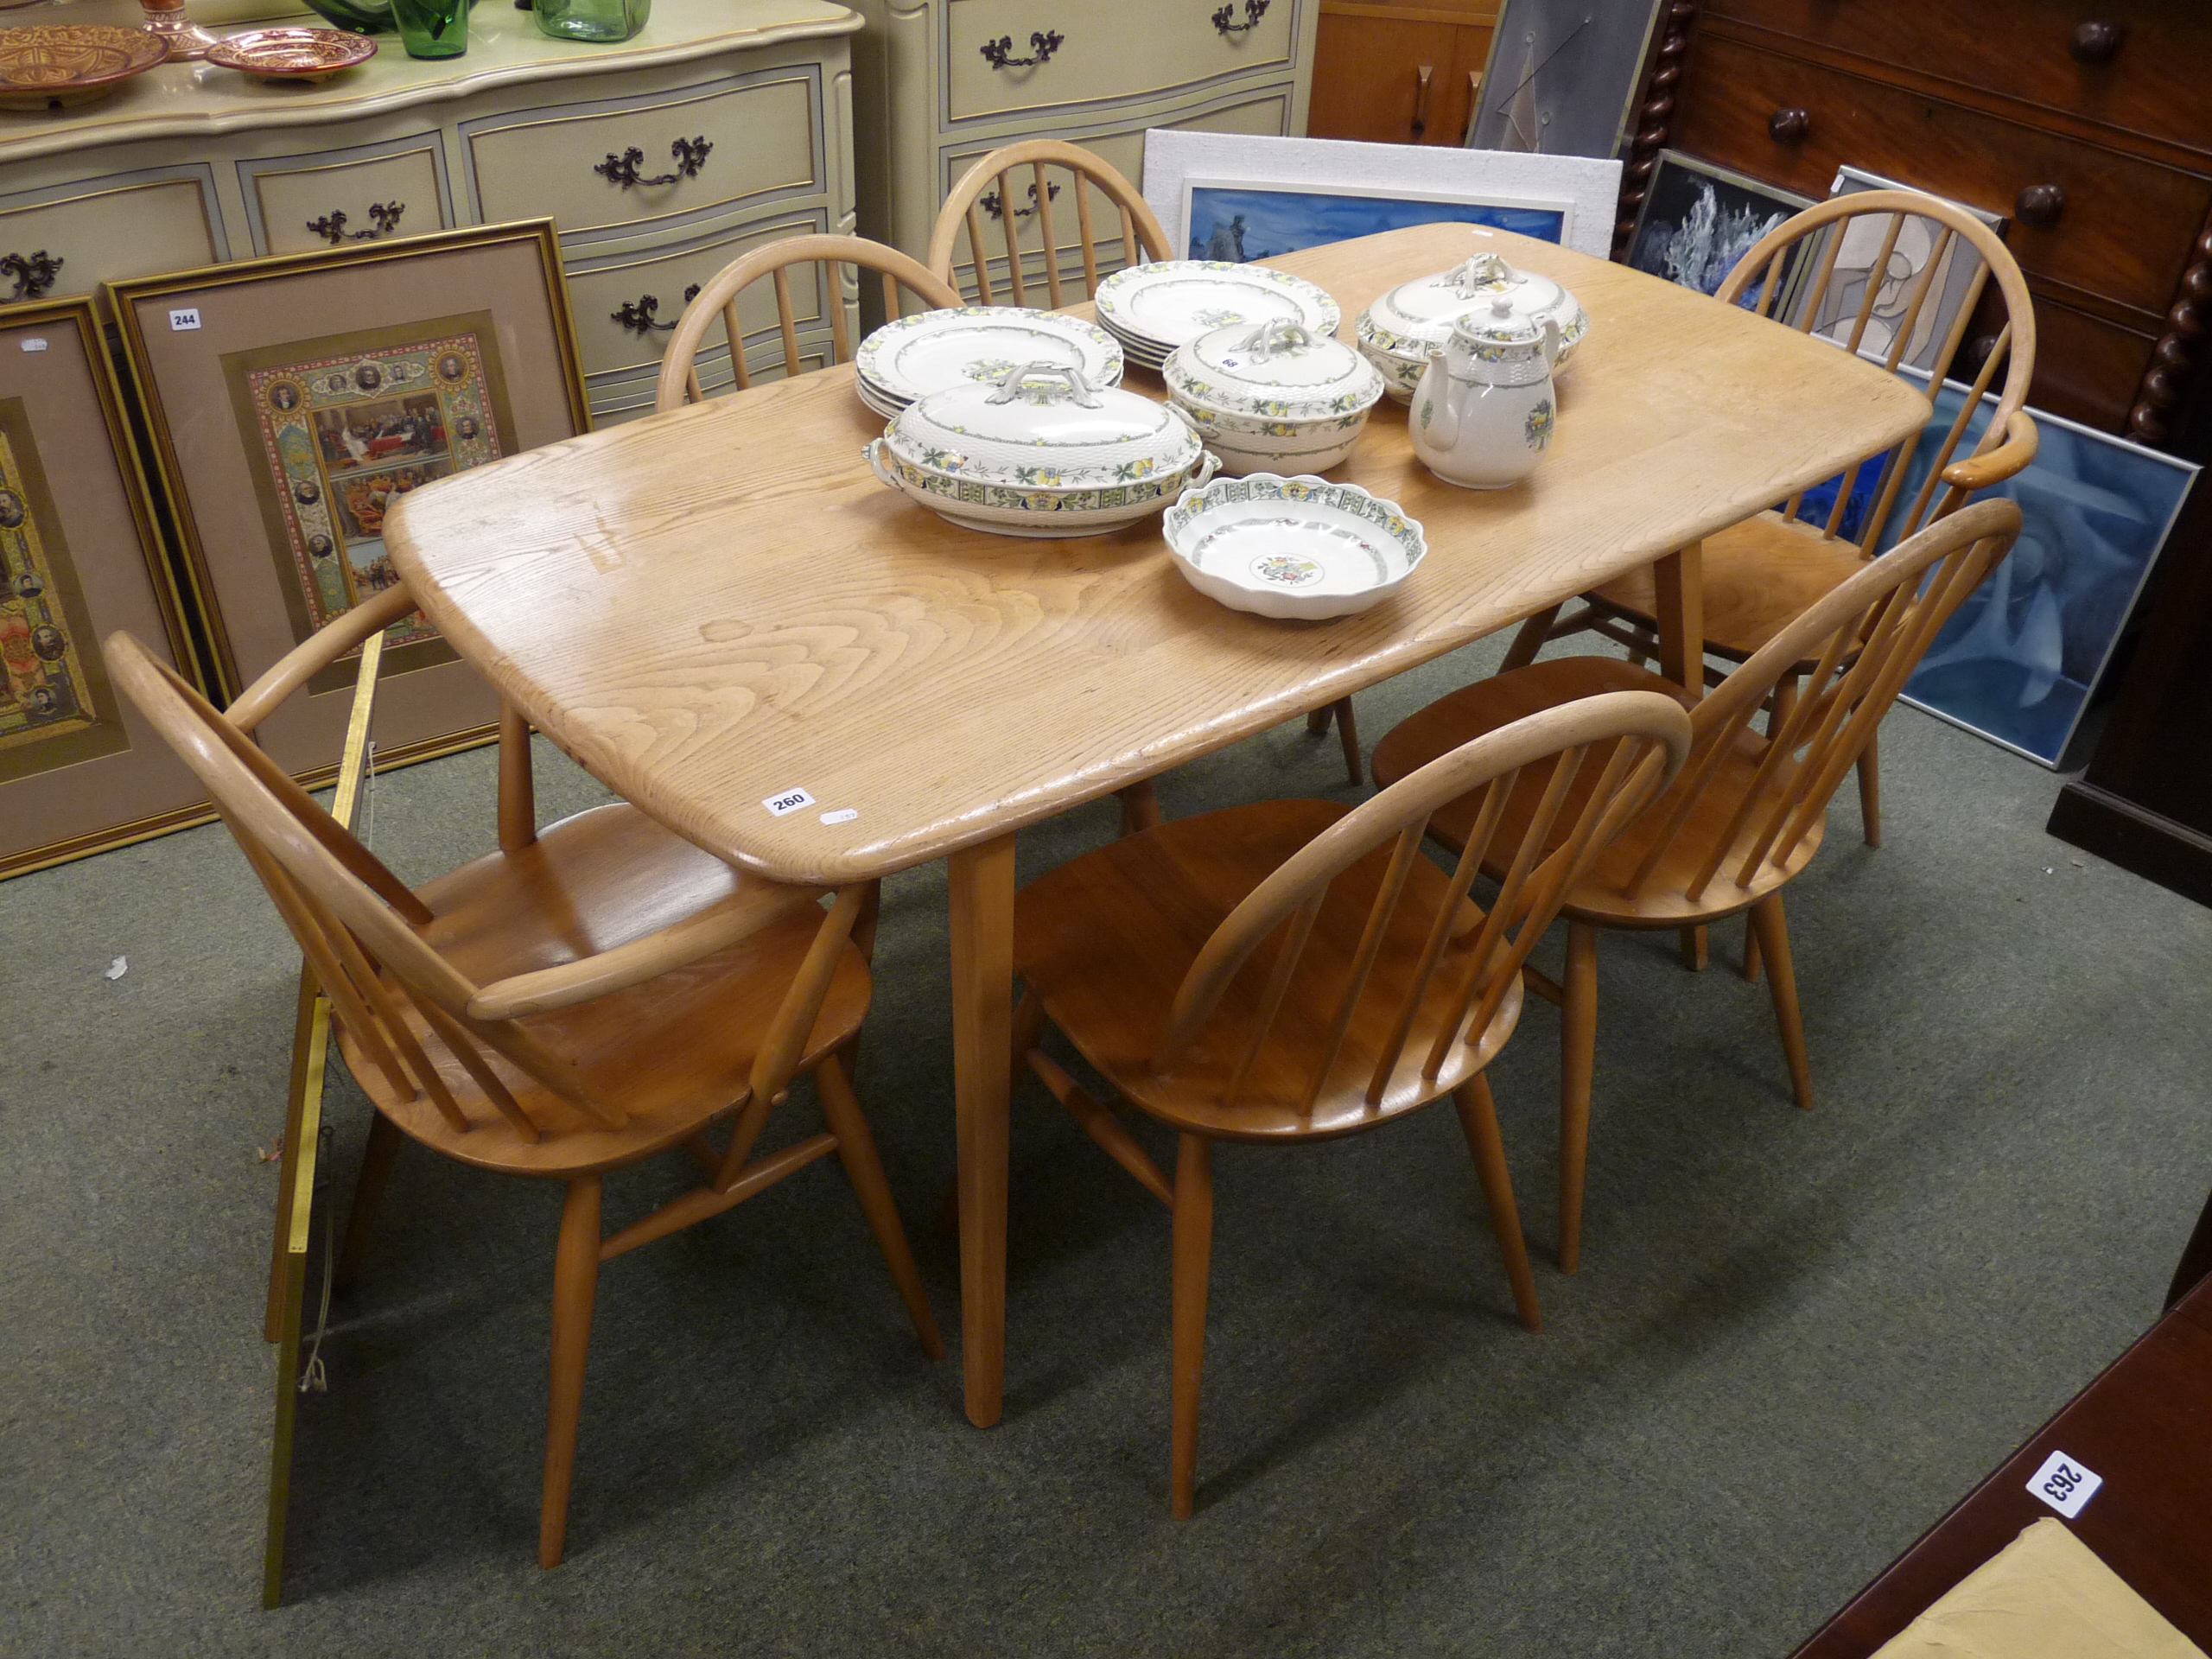 Ercol Blonde Elm dining table on outstretched legs and a matching set of 6 Ercol Windsor chairs